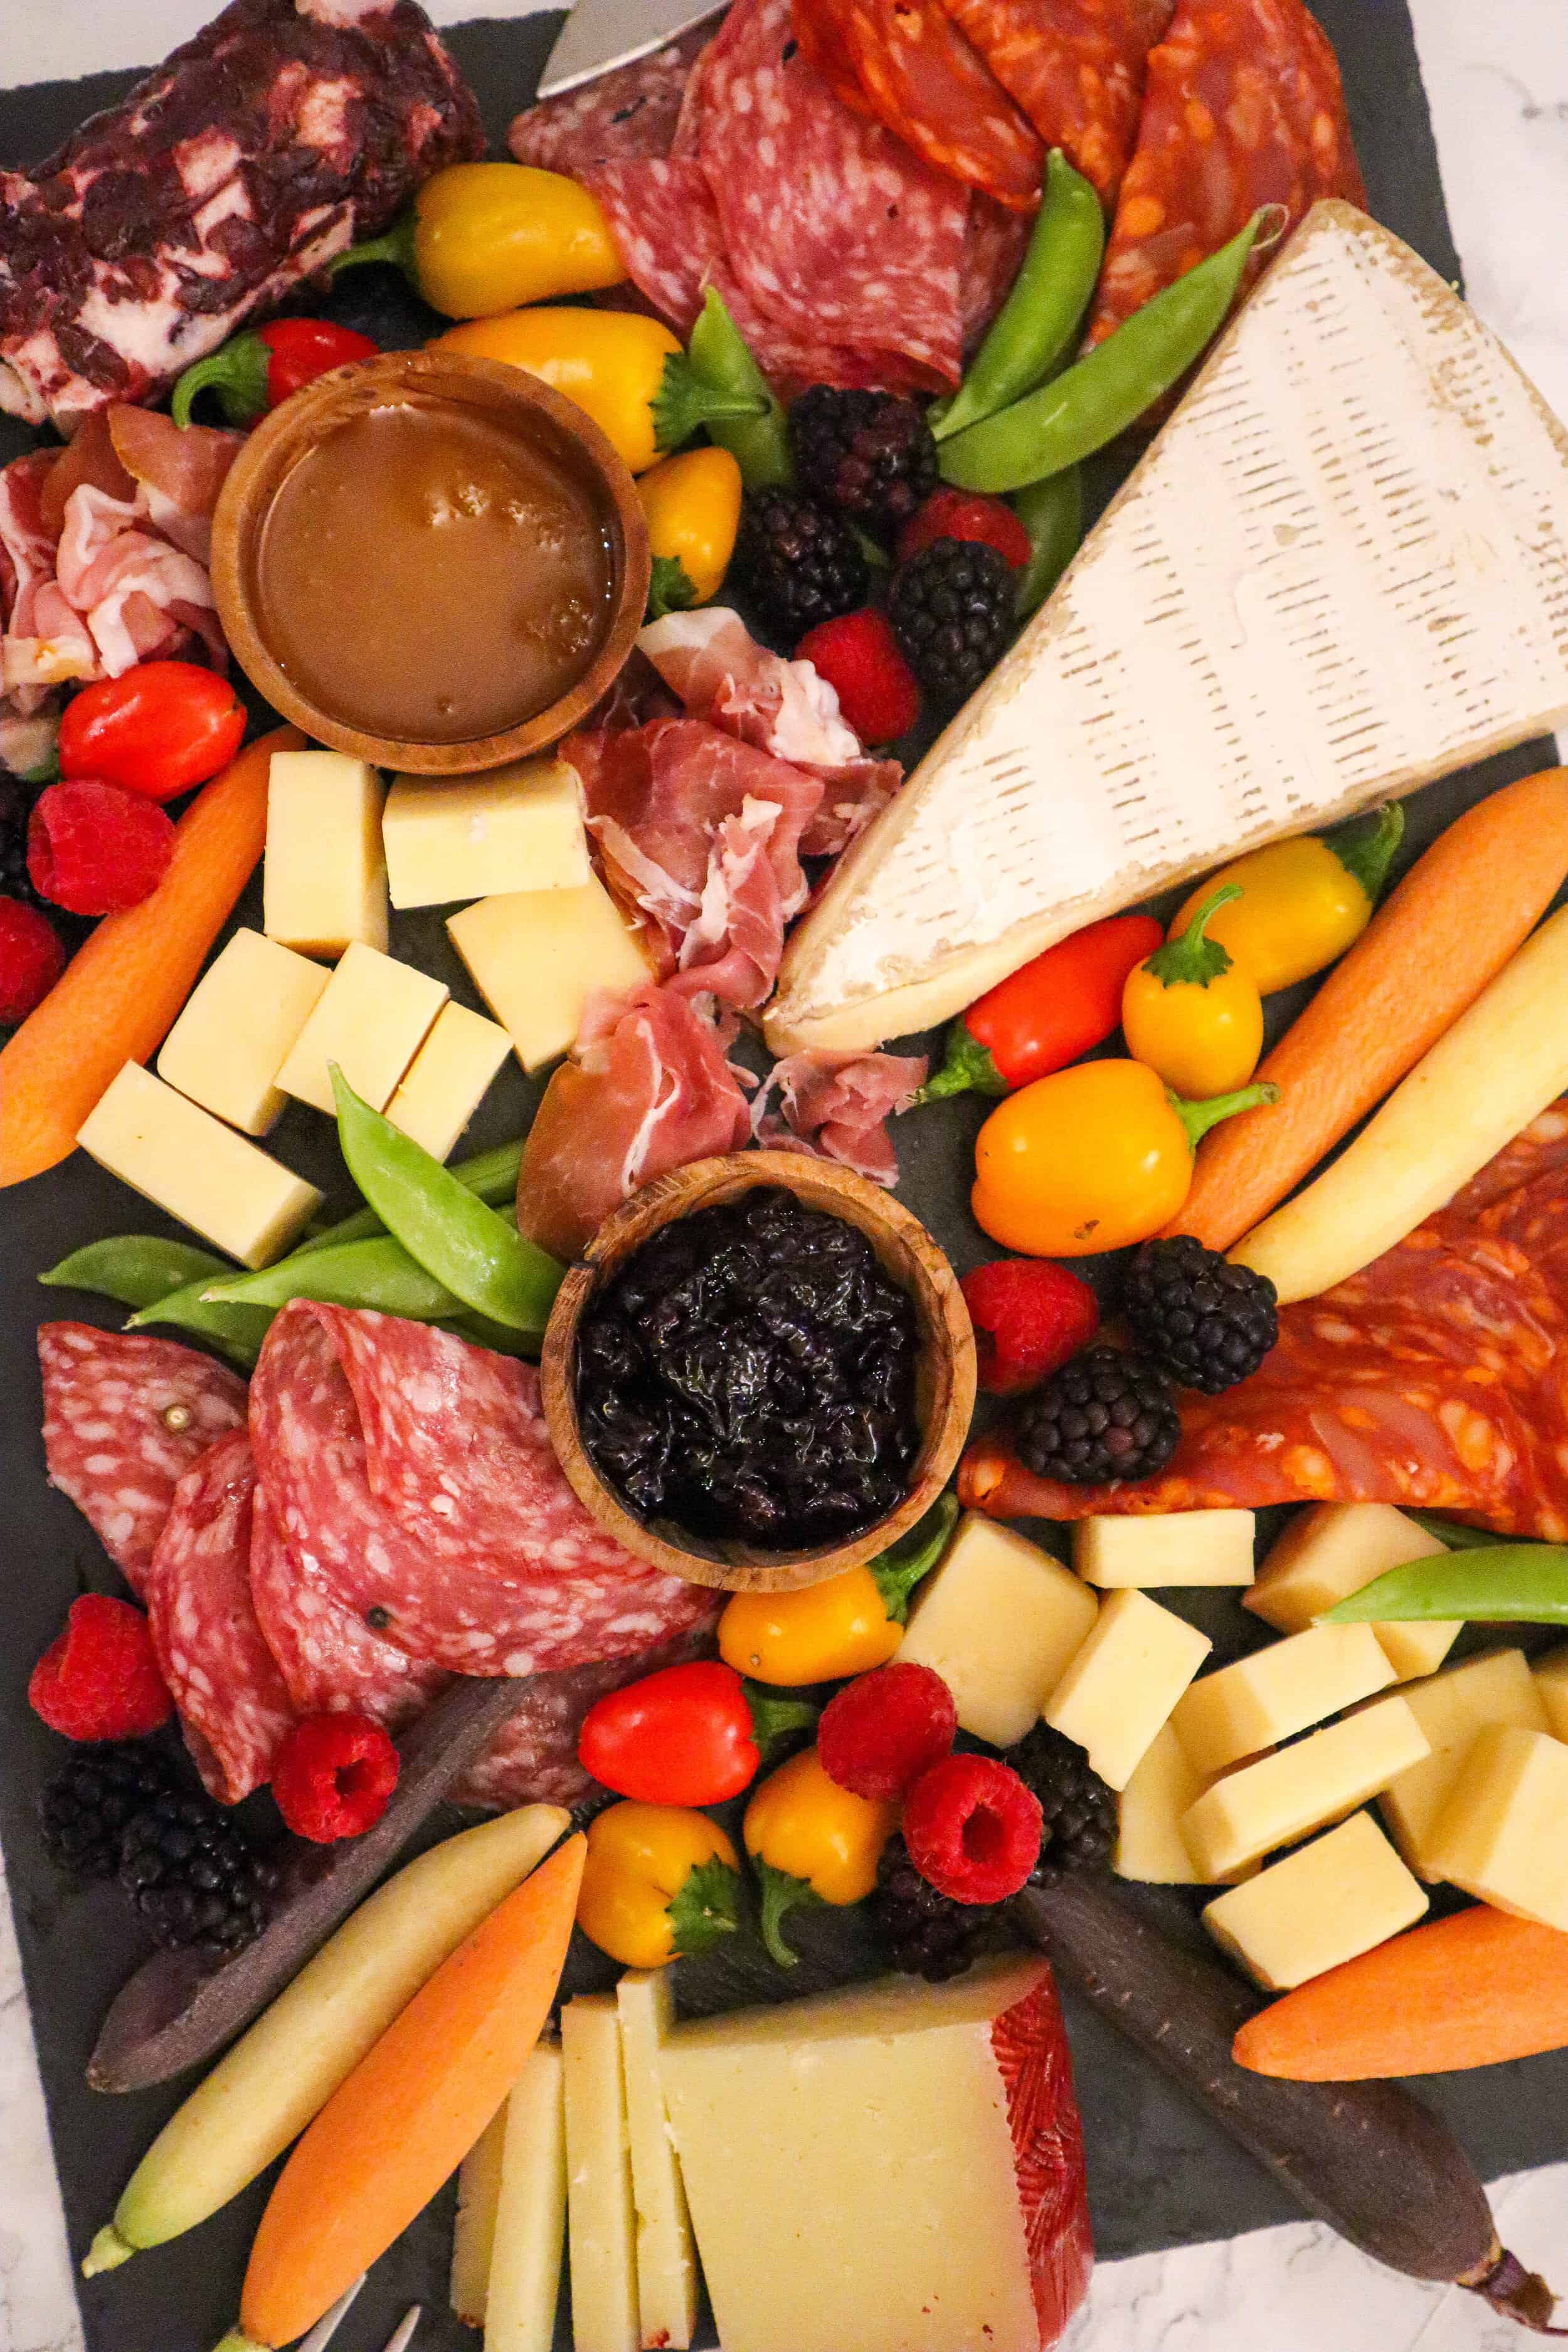 How to make a charcuterie board at home